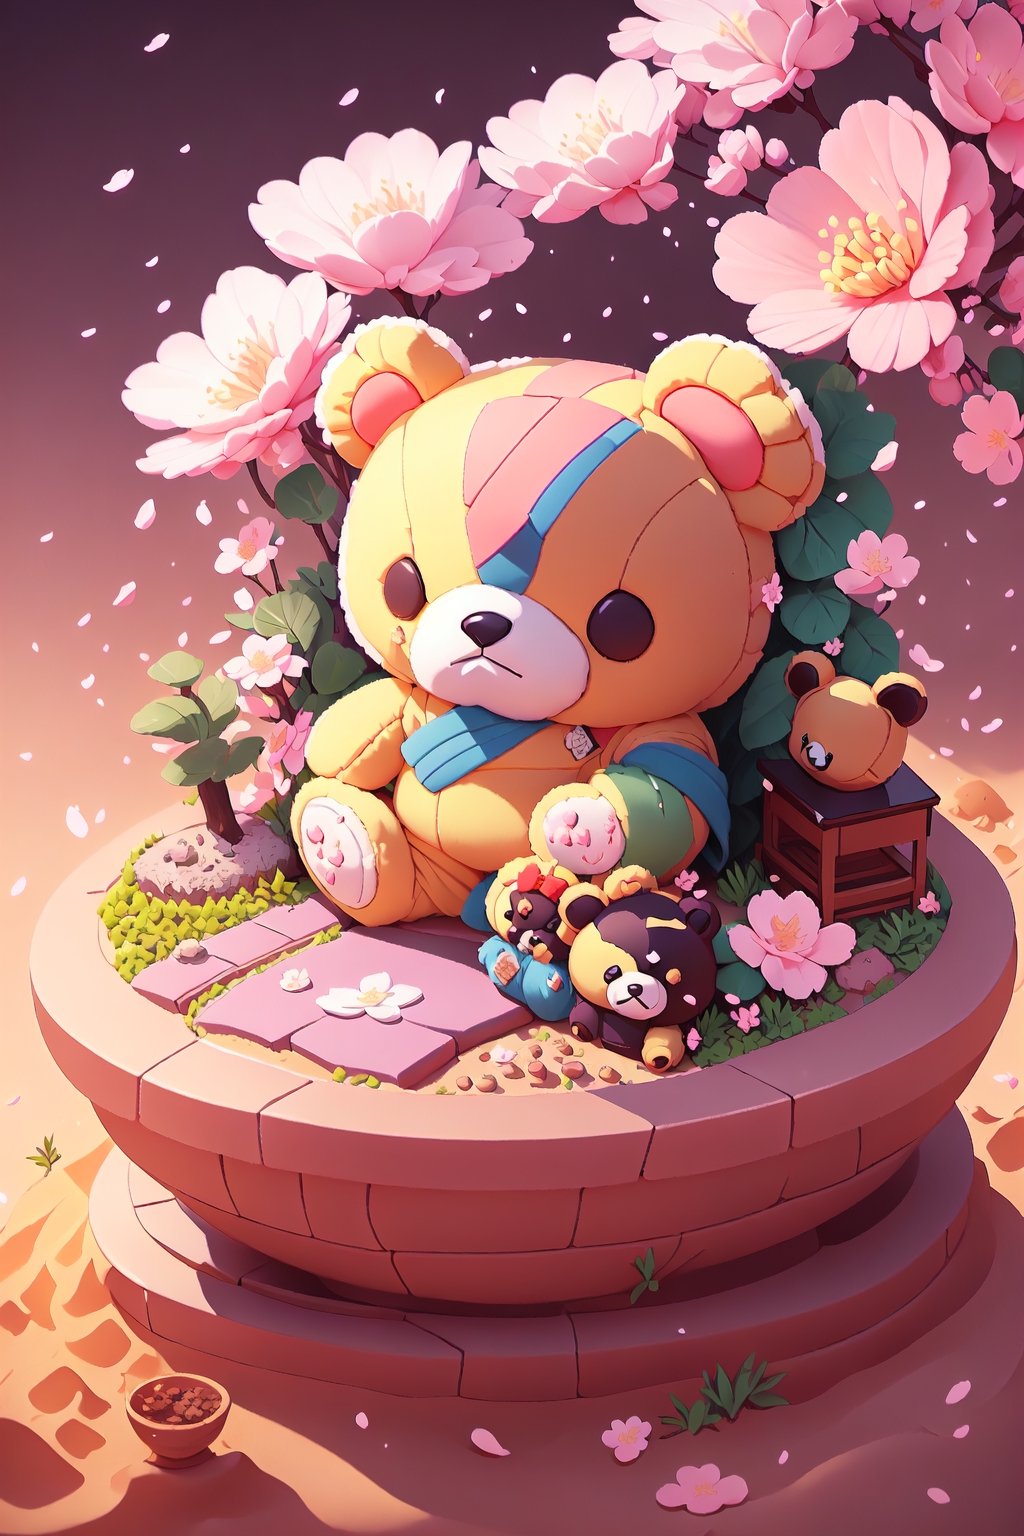 a teddy bear made of cherry blossoms, blooming petals shaped into a cuddly bear figure with round ears and fluffy limbs, displayed in a Zen garden surrounded by carefully raked sand patterns and bonsai trees, the scene evoking a sense of peace and tranquility, with a minimalist and harmonious composition that blends the natural beauty of the cherry blossoms with the structured elegance of the garden, focusing on the contrast between light and shadow to enhance the simplicity and purity of the scene,3D MODEL,Illustration